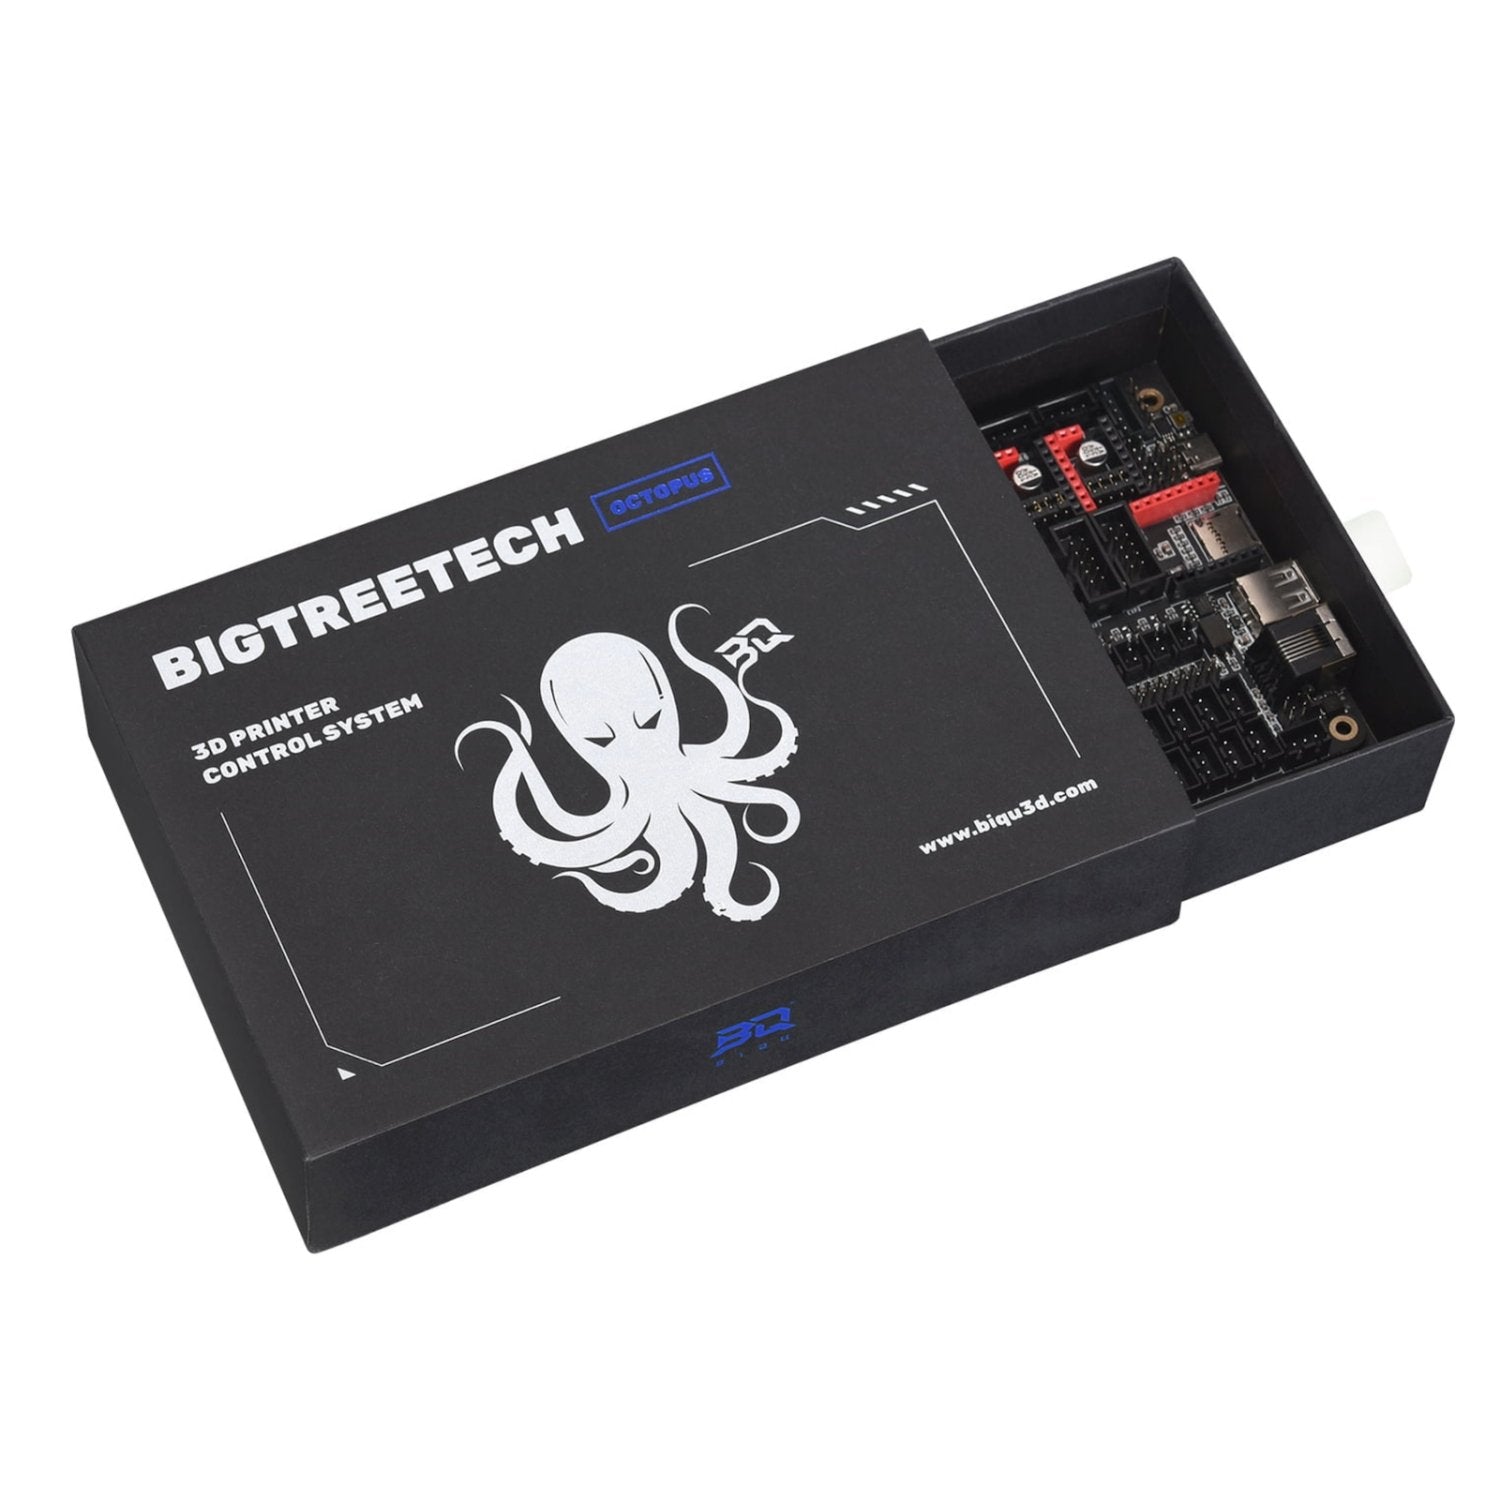 BIGTREETECH® Octopus Pro 32-Bit Motherboard with 8 Stepper Driver Ports